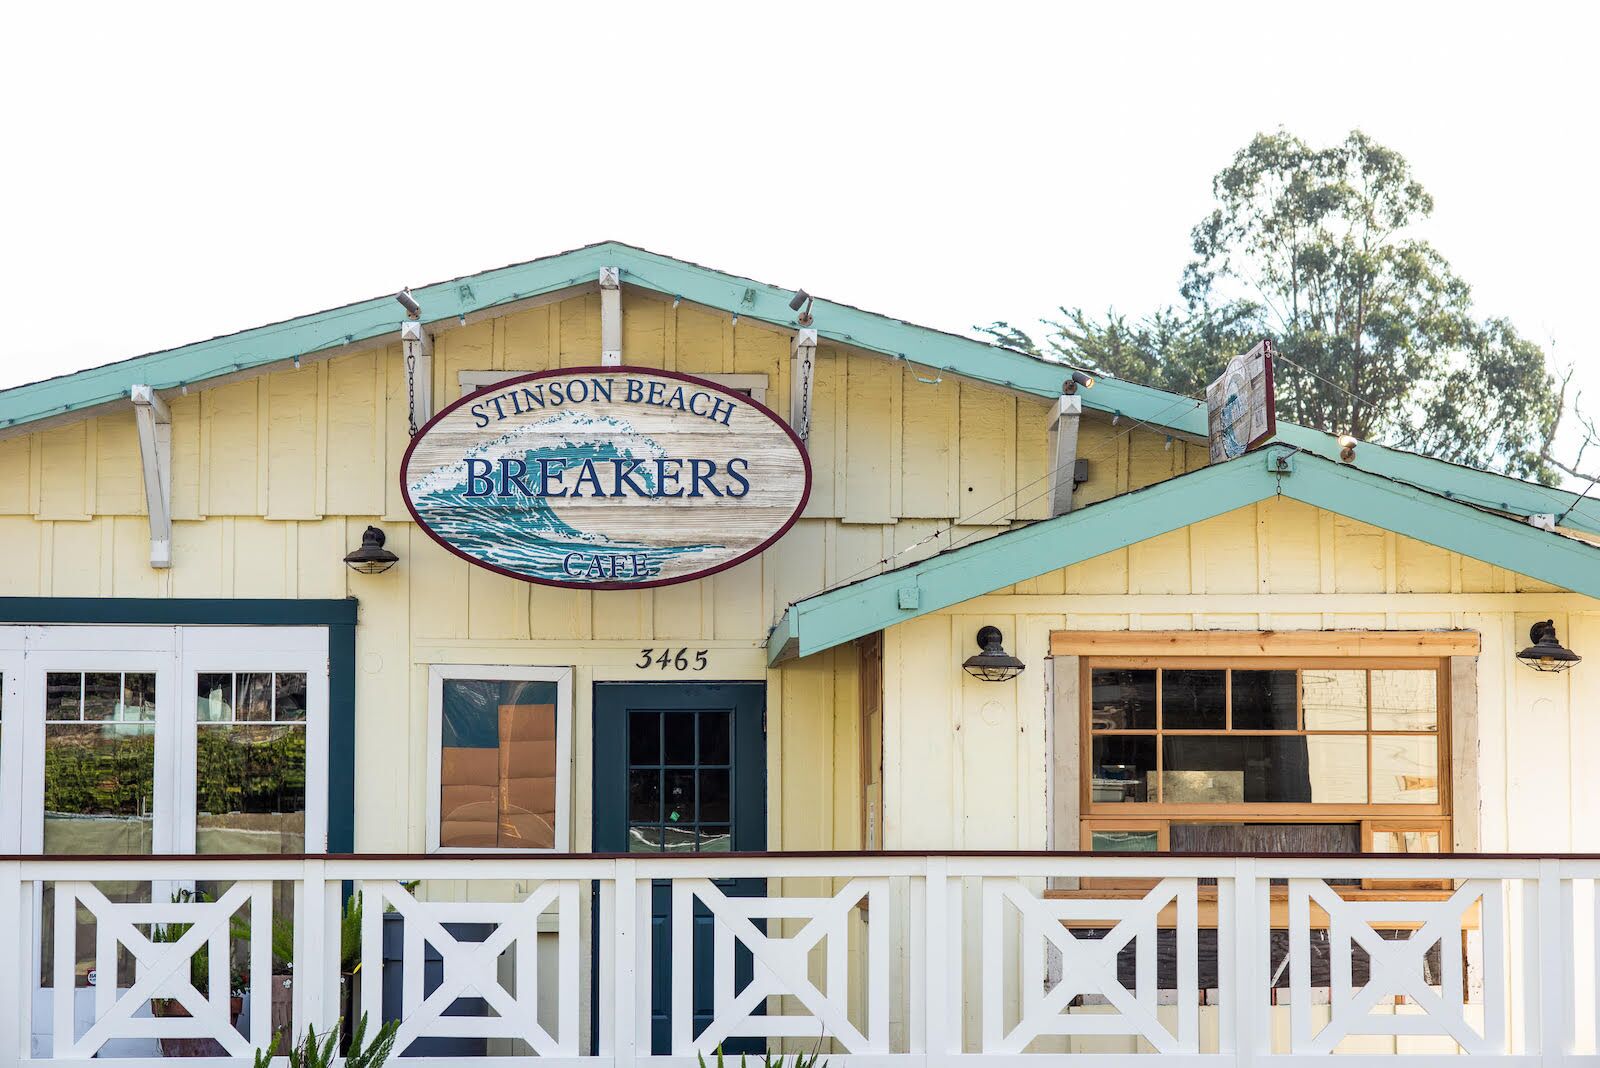 The facade of the Breakers Cafe at Stinson Beach